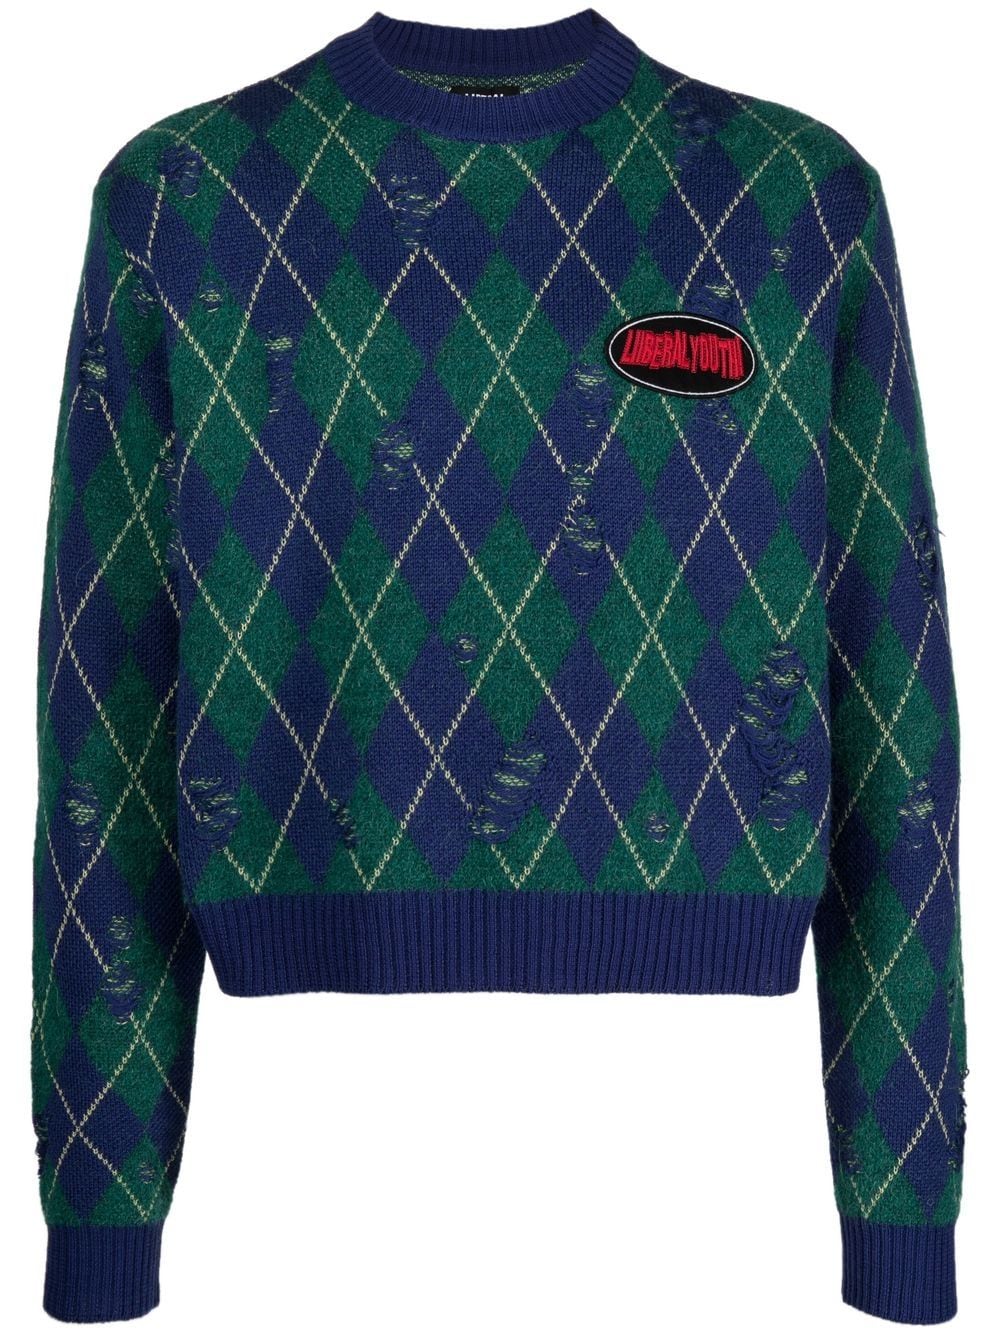 Liberal Youth Ministry distressed argyle-pattern jumper - Green von Liberal Youth Ministry